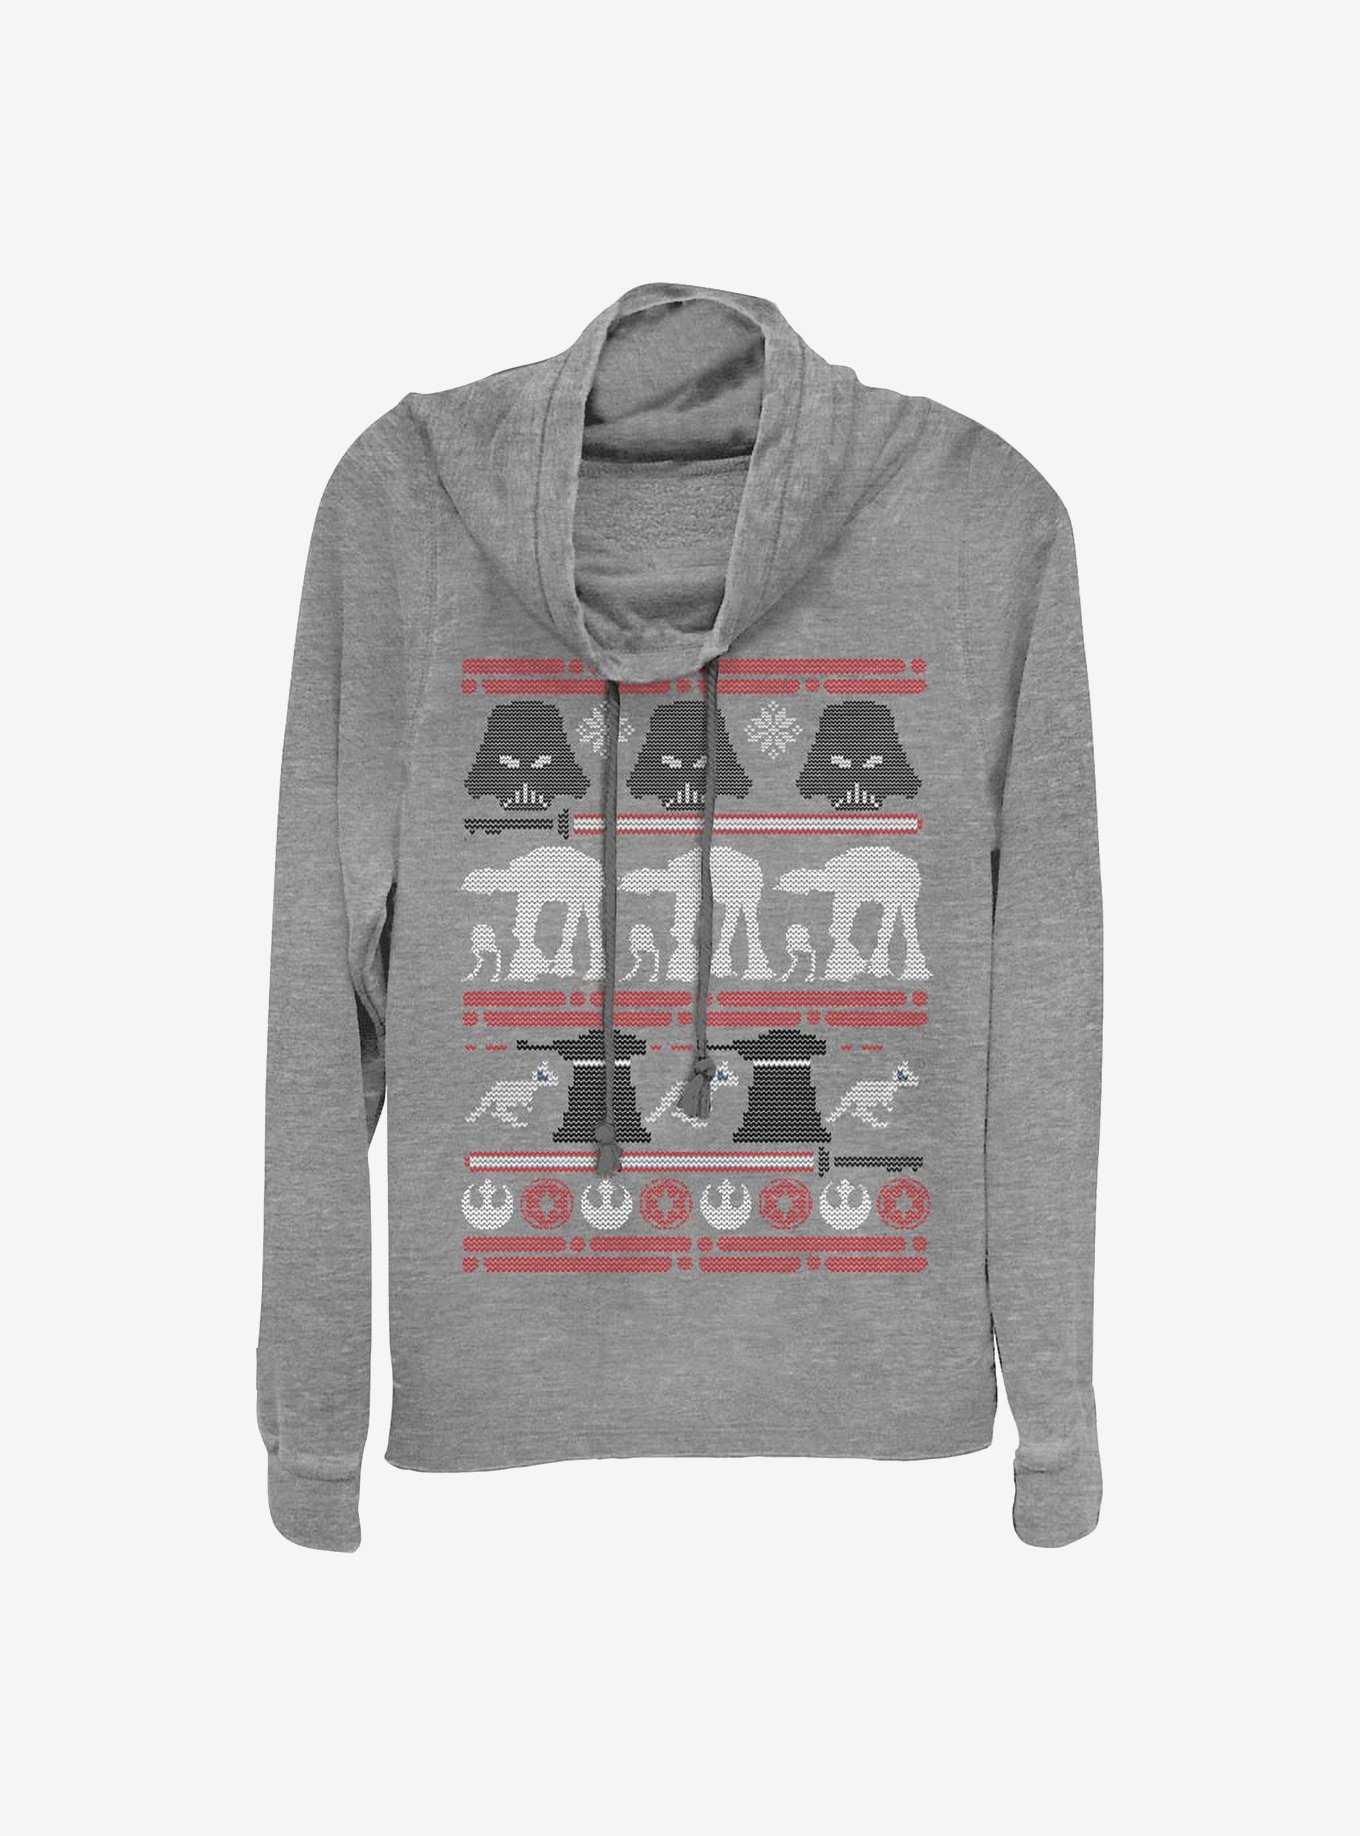 Star Wars Hoth Battle Ugly Christmas Sweater Cowl Neck Long-Sleeve Girls Top, , hi-res